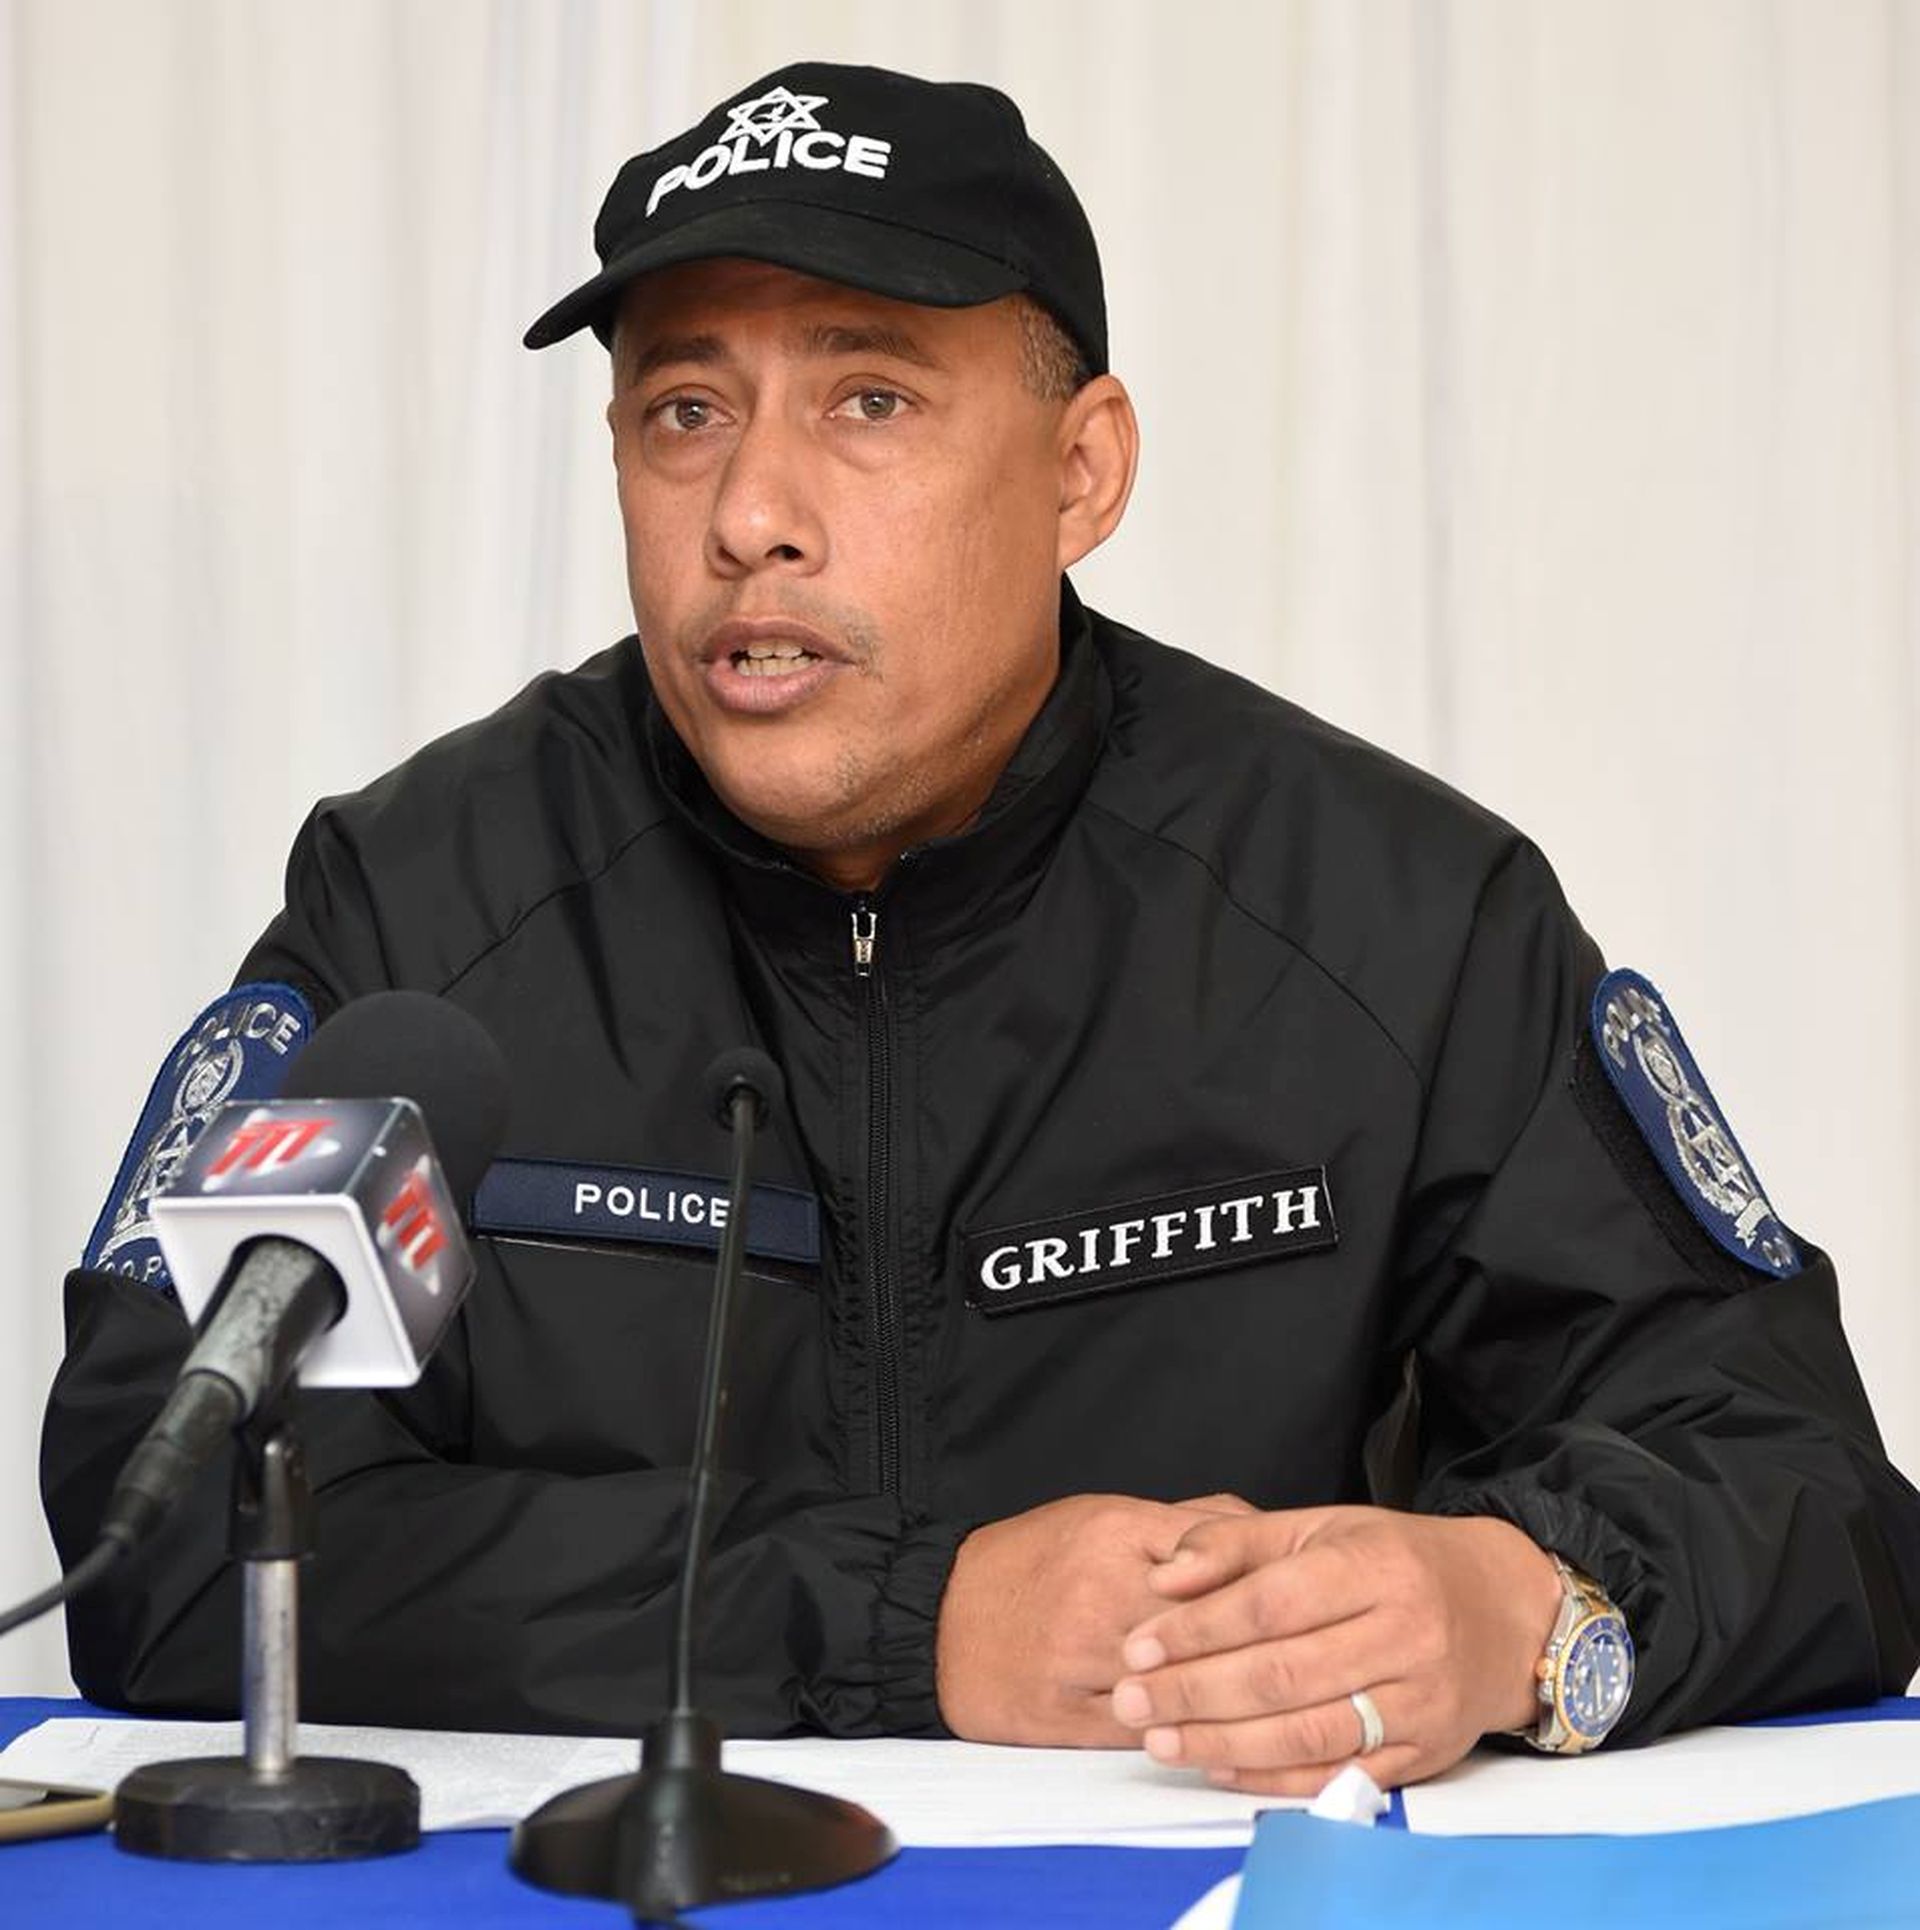 COP Griffith: Attacks on Police will not be tolerated